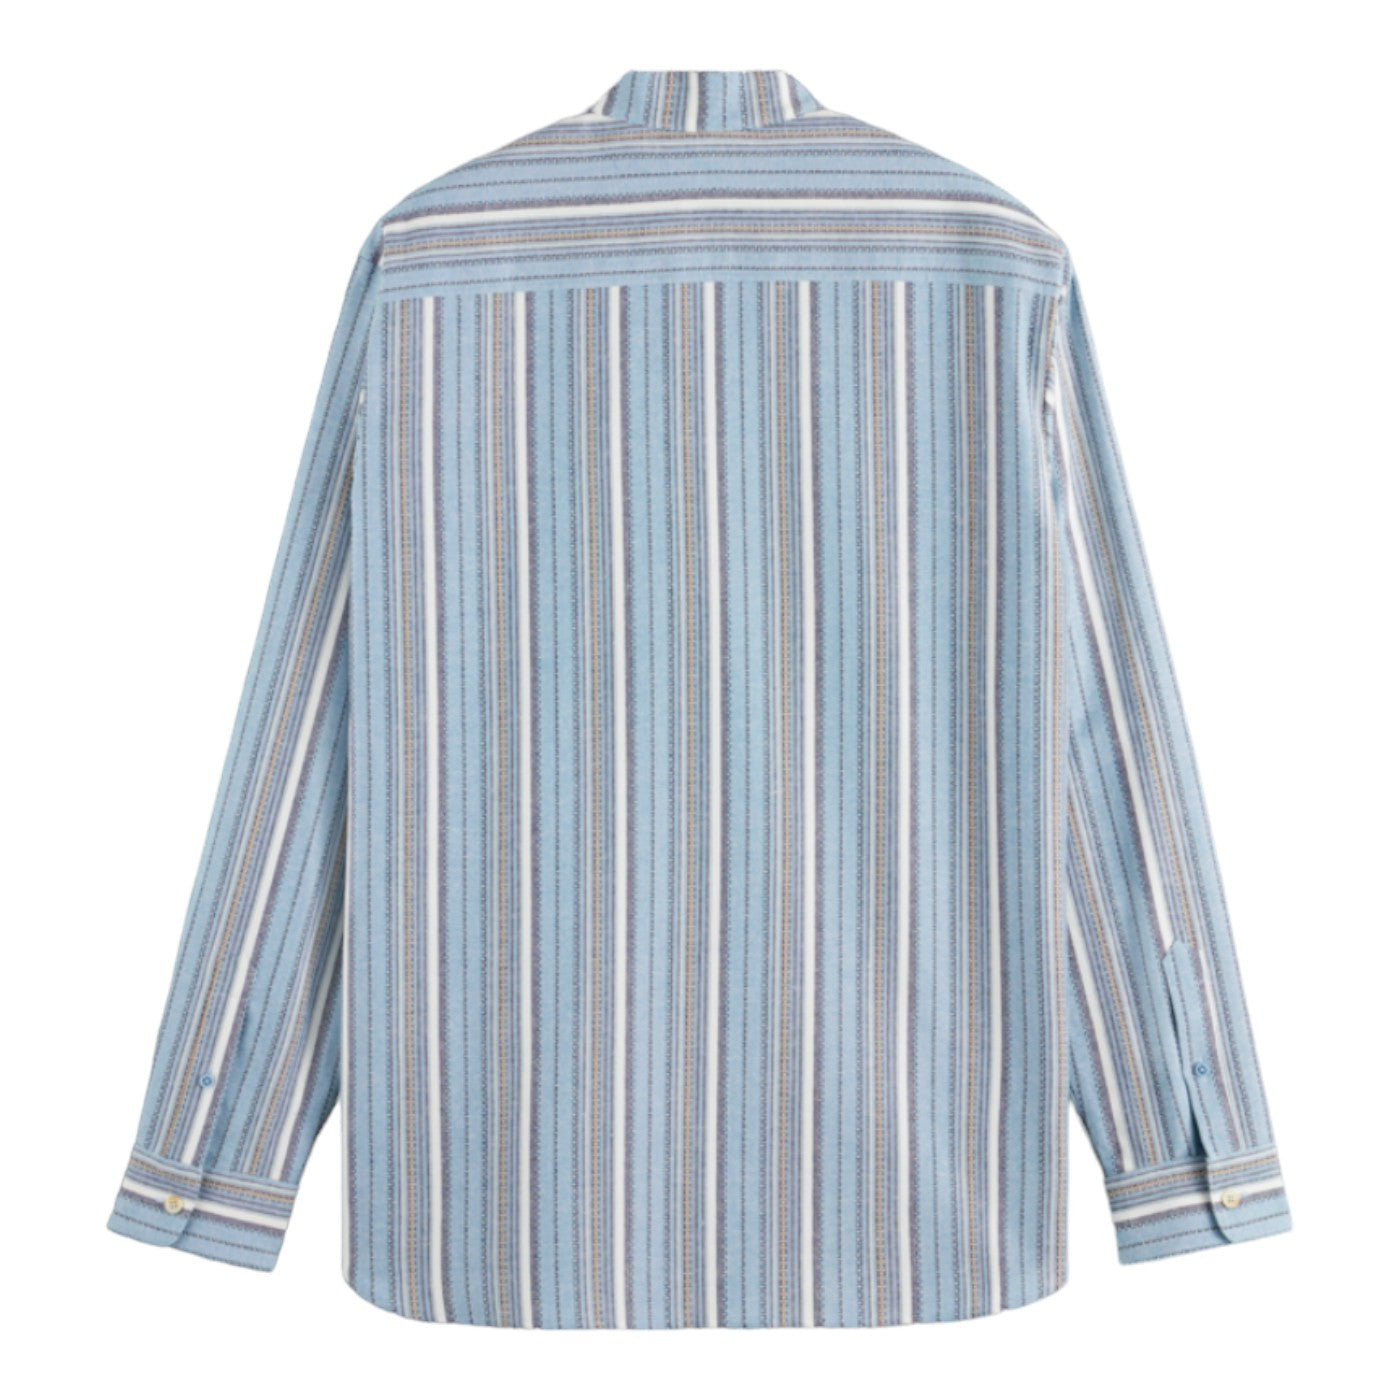 Blue striped long sleeve button down